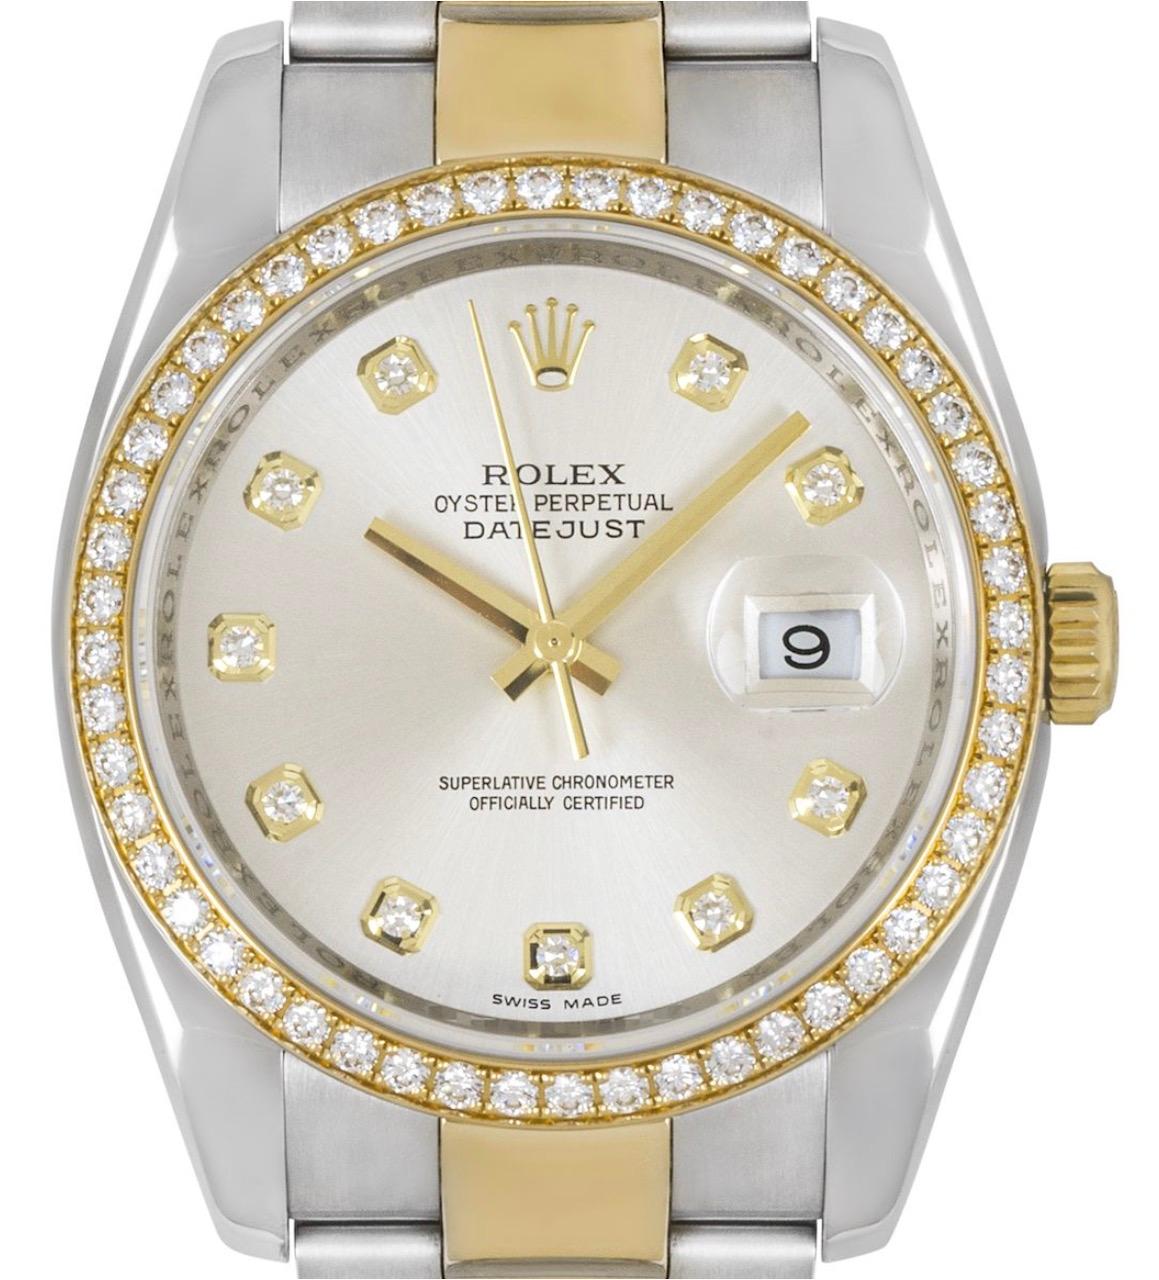 A Datejust 36 in Oystersteel and yellow gold by Rolex. Features a silver dial set with round brilliant cut diamond hour markers and a fixed yellow gold bezel set with 52 round brilliant cut diamonds. The Oyster bracelet comes with a steel and gold